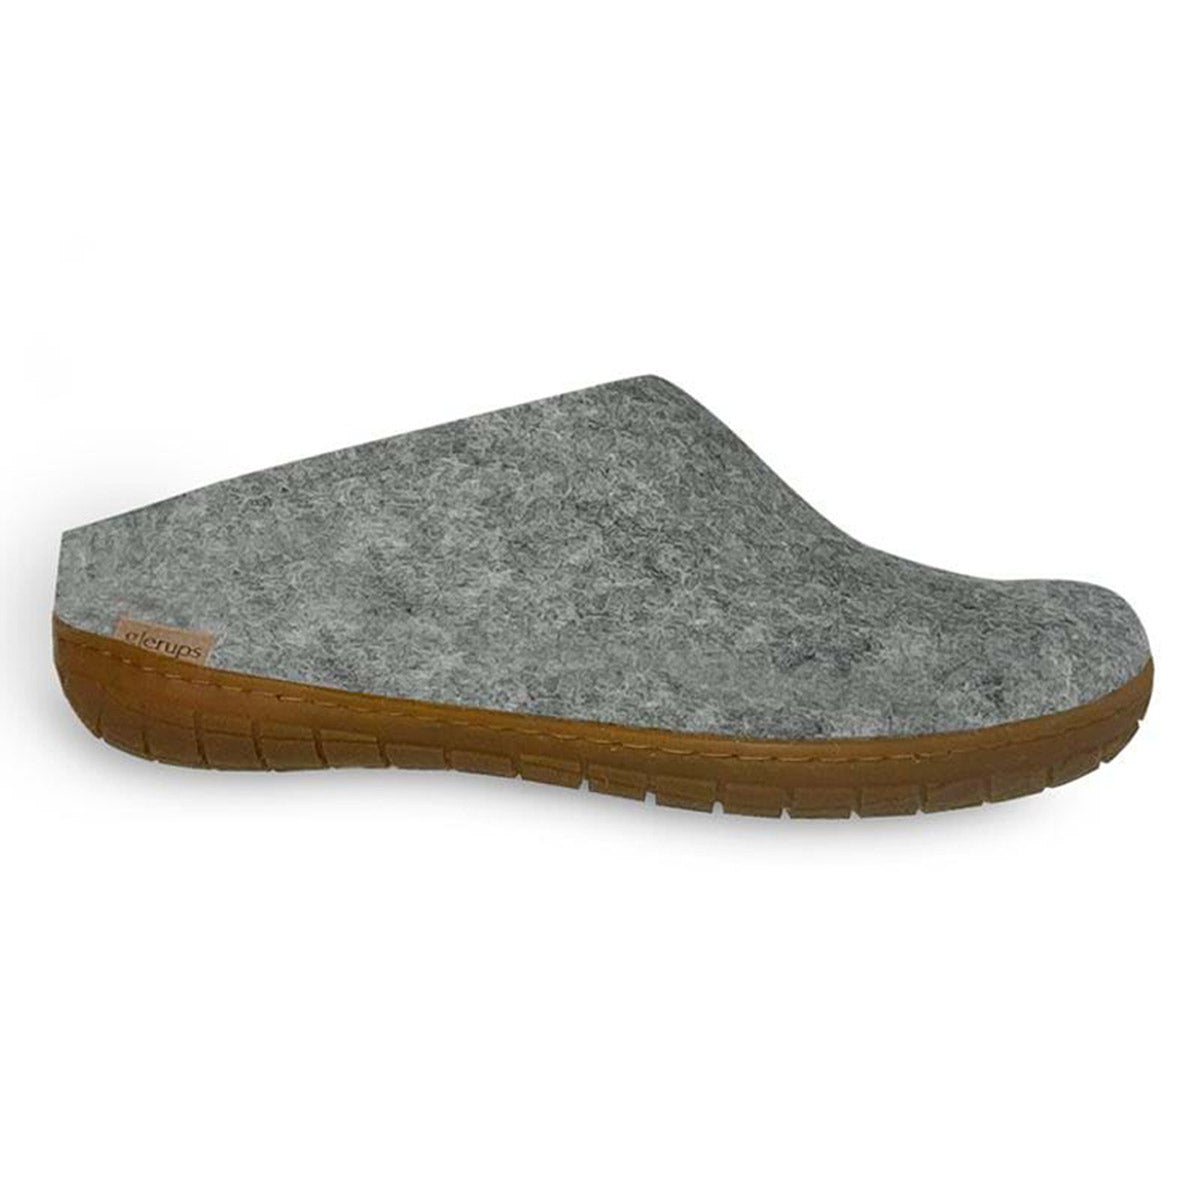 A Glerups slip on rubber soled honey grey slipper with a brown sole on a white background.